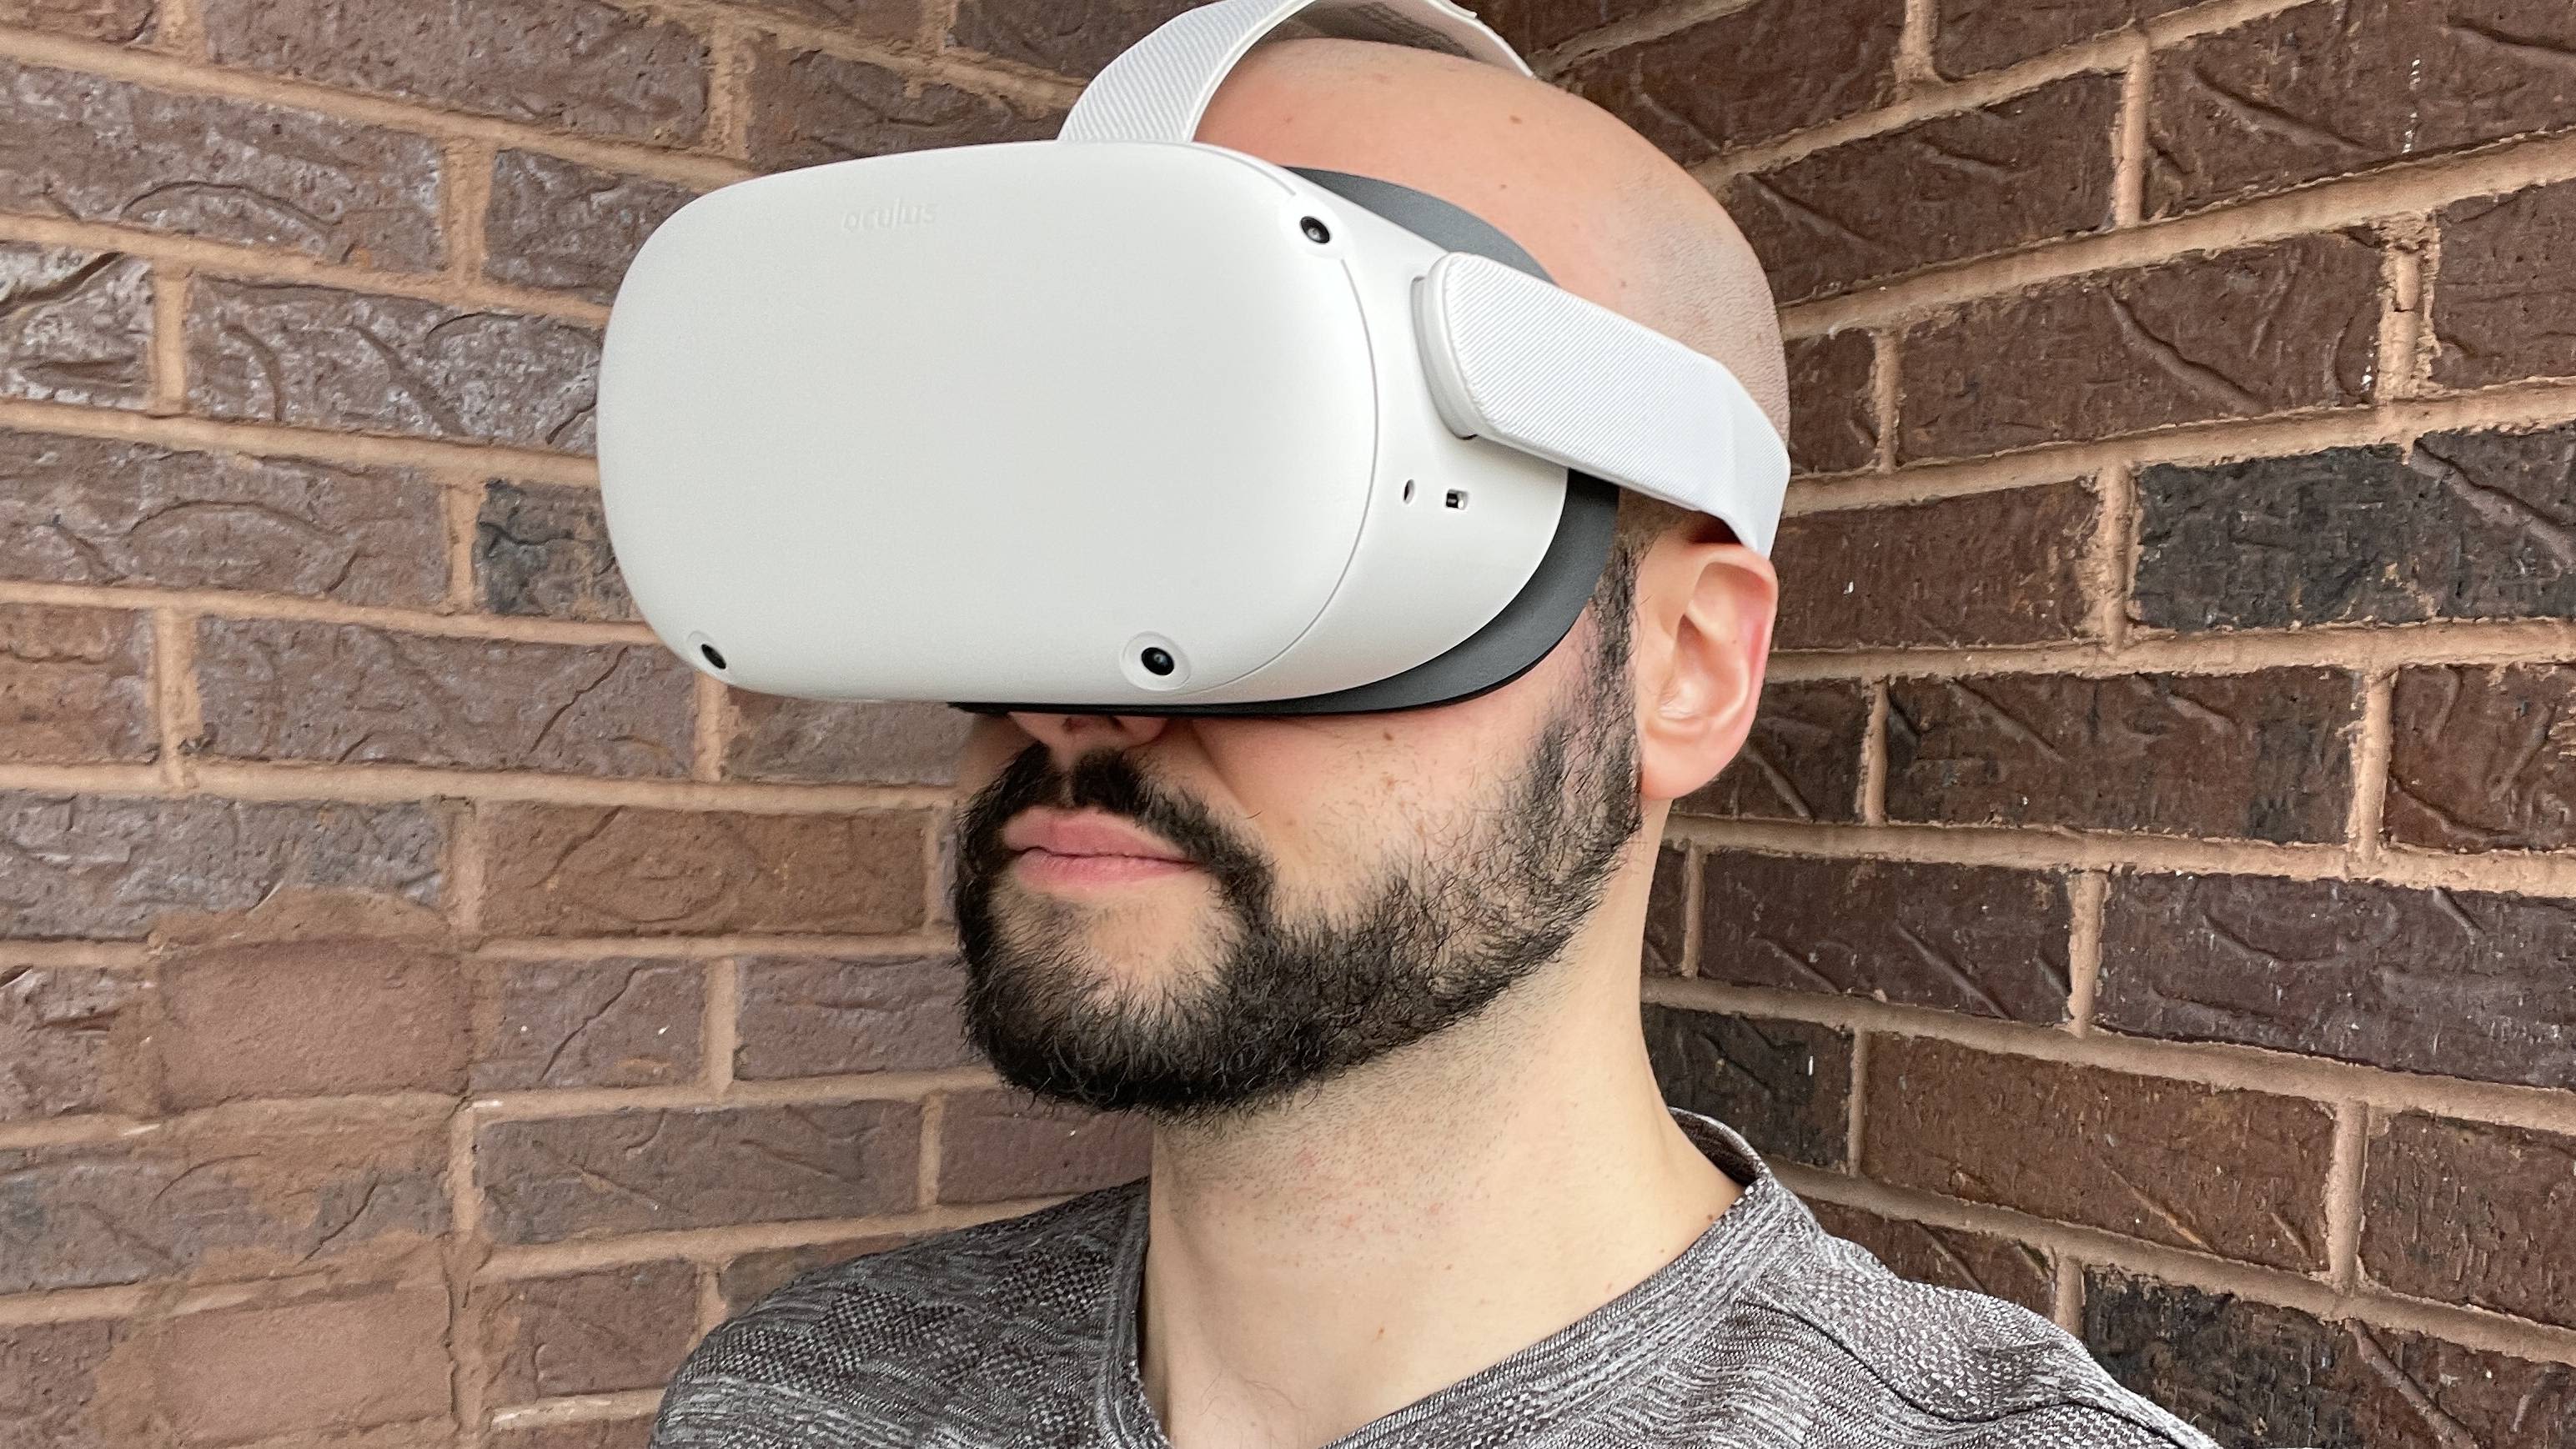 concrete Sidewalk companion Oculus Quest 2 games for exercise: How to get started | CNN Underscored